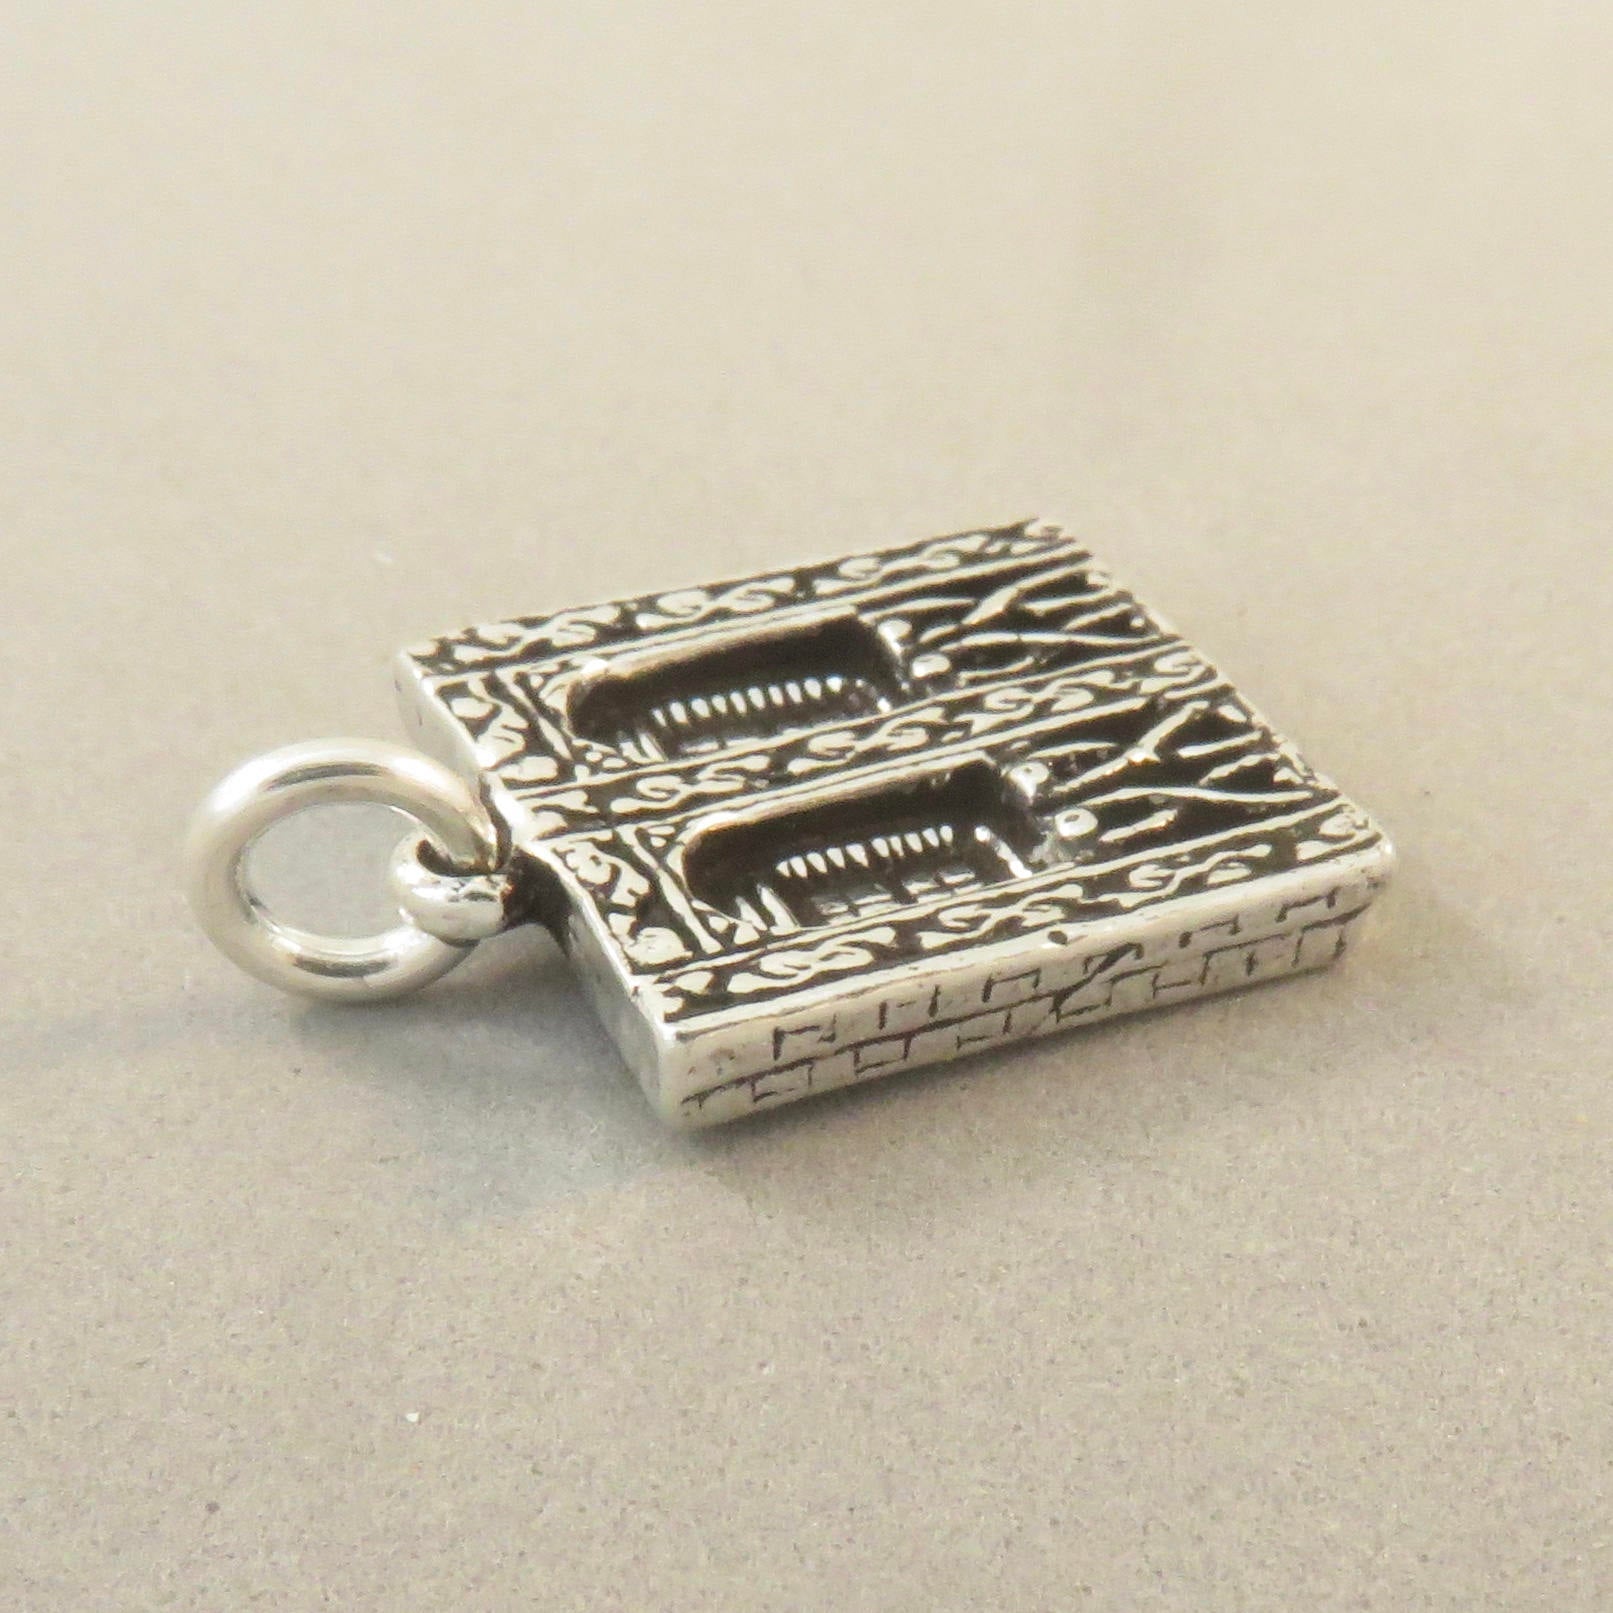 BALCONY .925 Sterling Silver 3-D Charm Pendant French Quarter New Orle ...